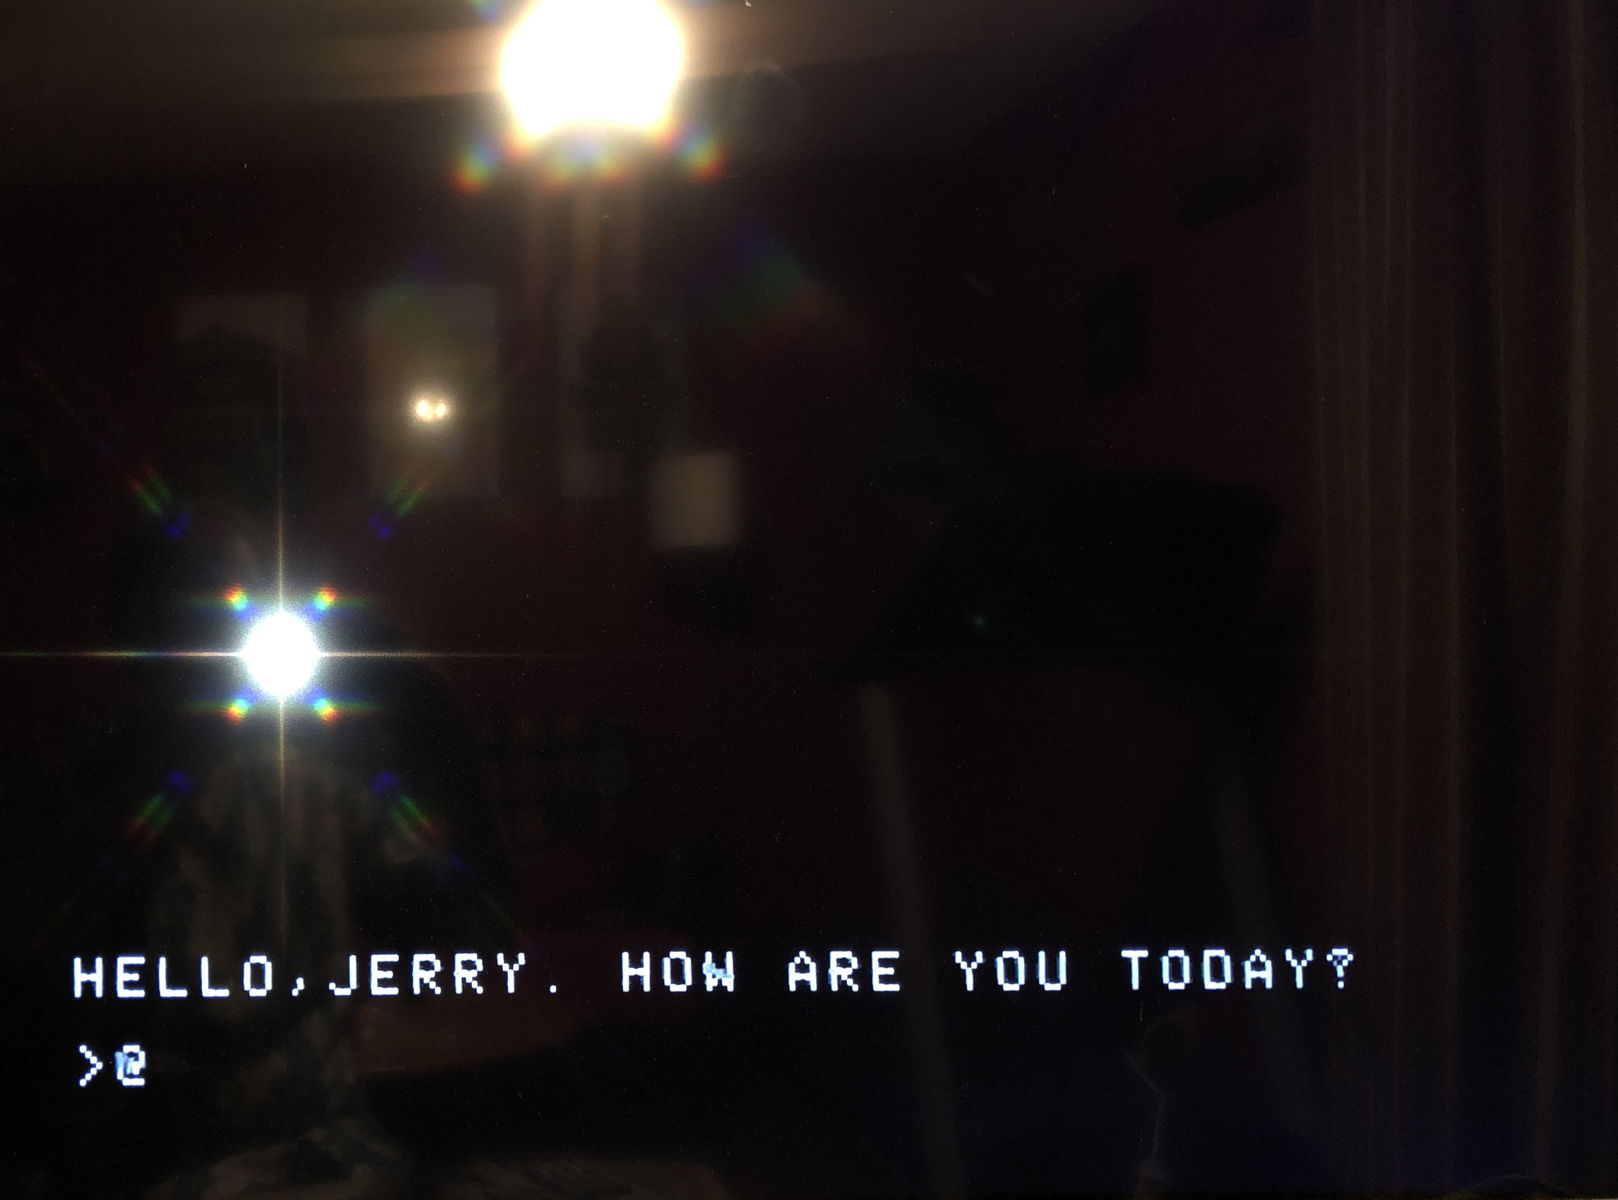 Replica 1: How are you today?: Apple 1 Integer BASIC imitates HAL. “Hello, Jerry. How are you today?”; Replica 1